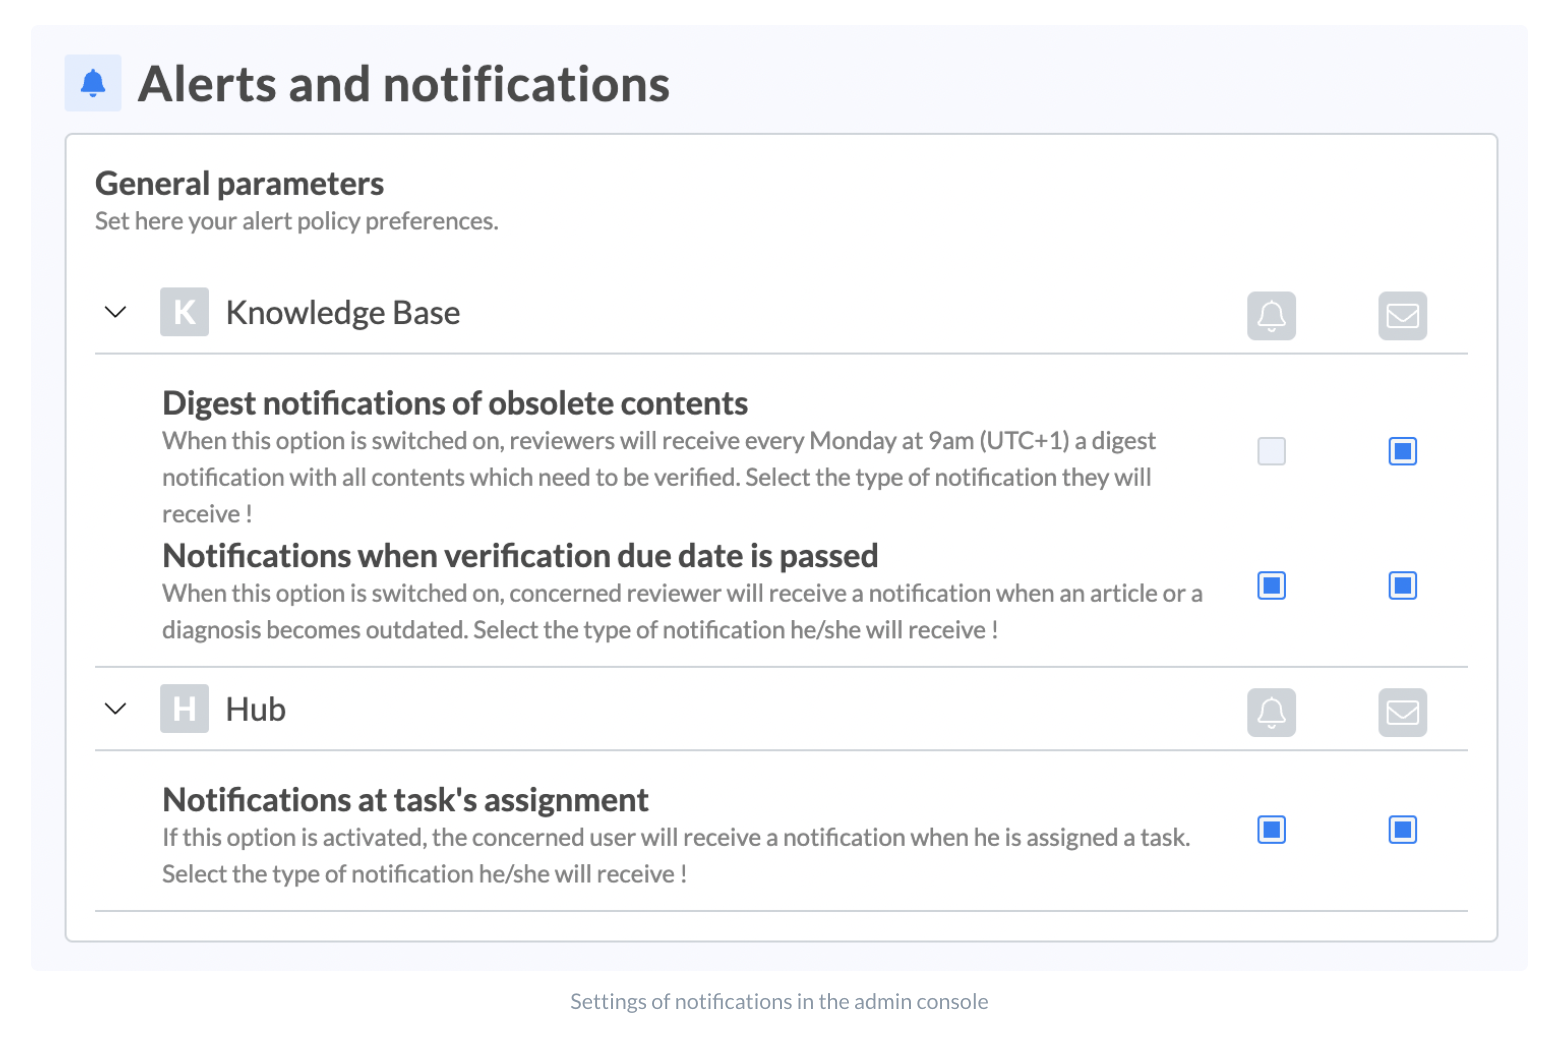 Settings of notifications in the admin console